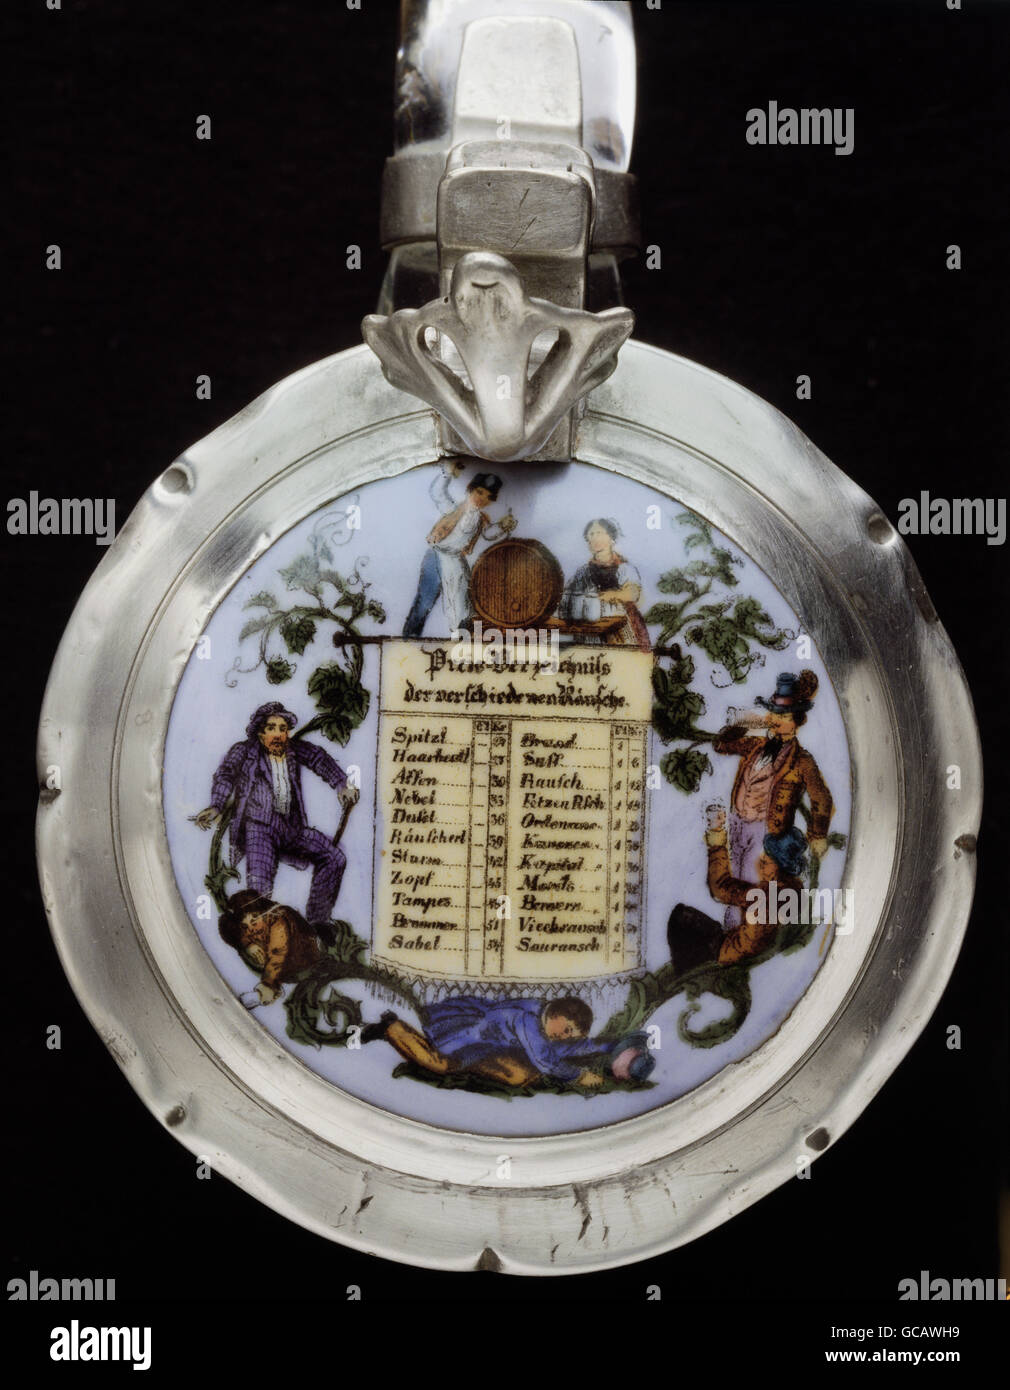 fine arts, painting, painted beer jug lid, tin mounting, transfer lithography, prize list of 22 states of alcoholic intoxication, Germany, 2nd half 19th century, Stock Photo